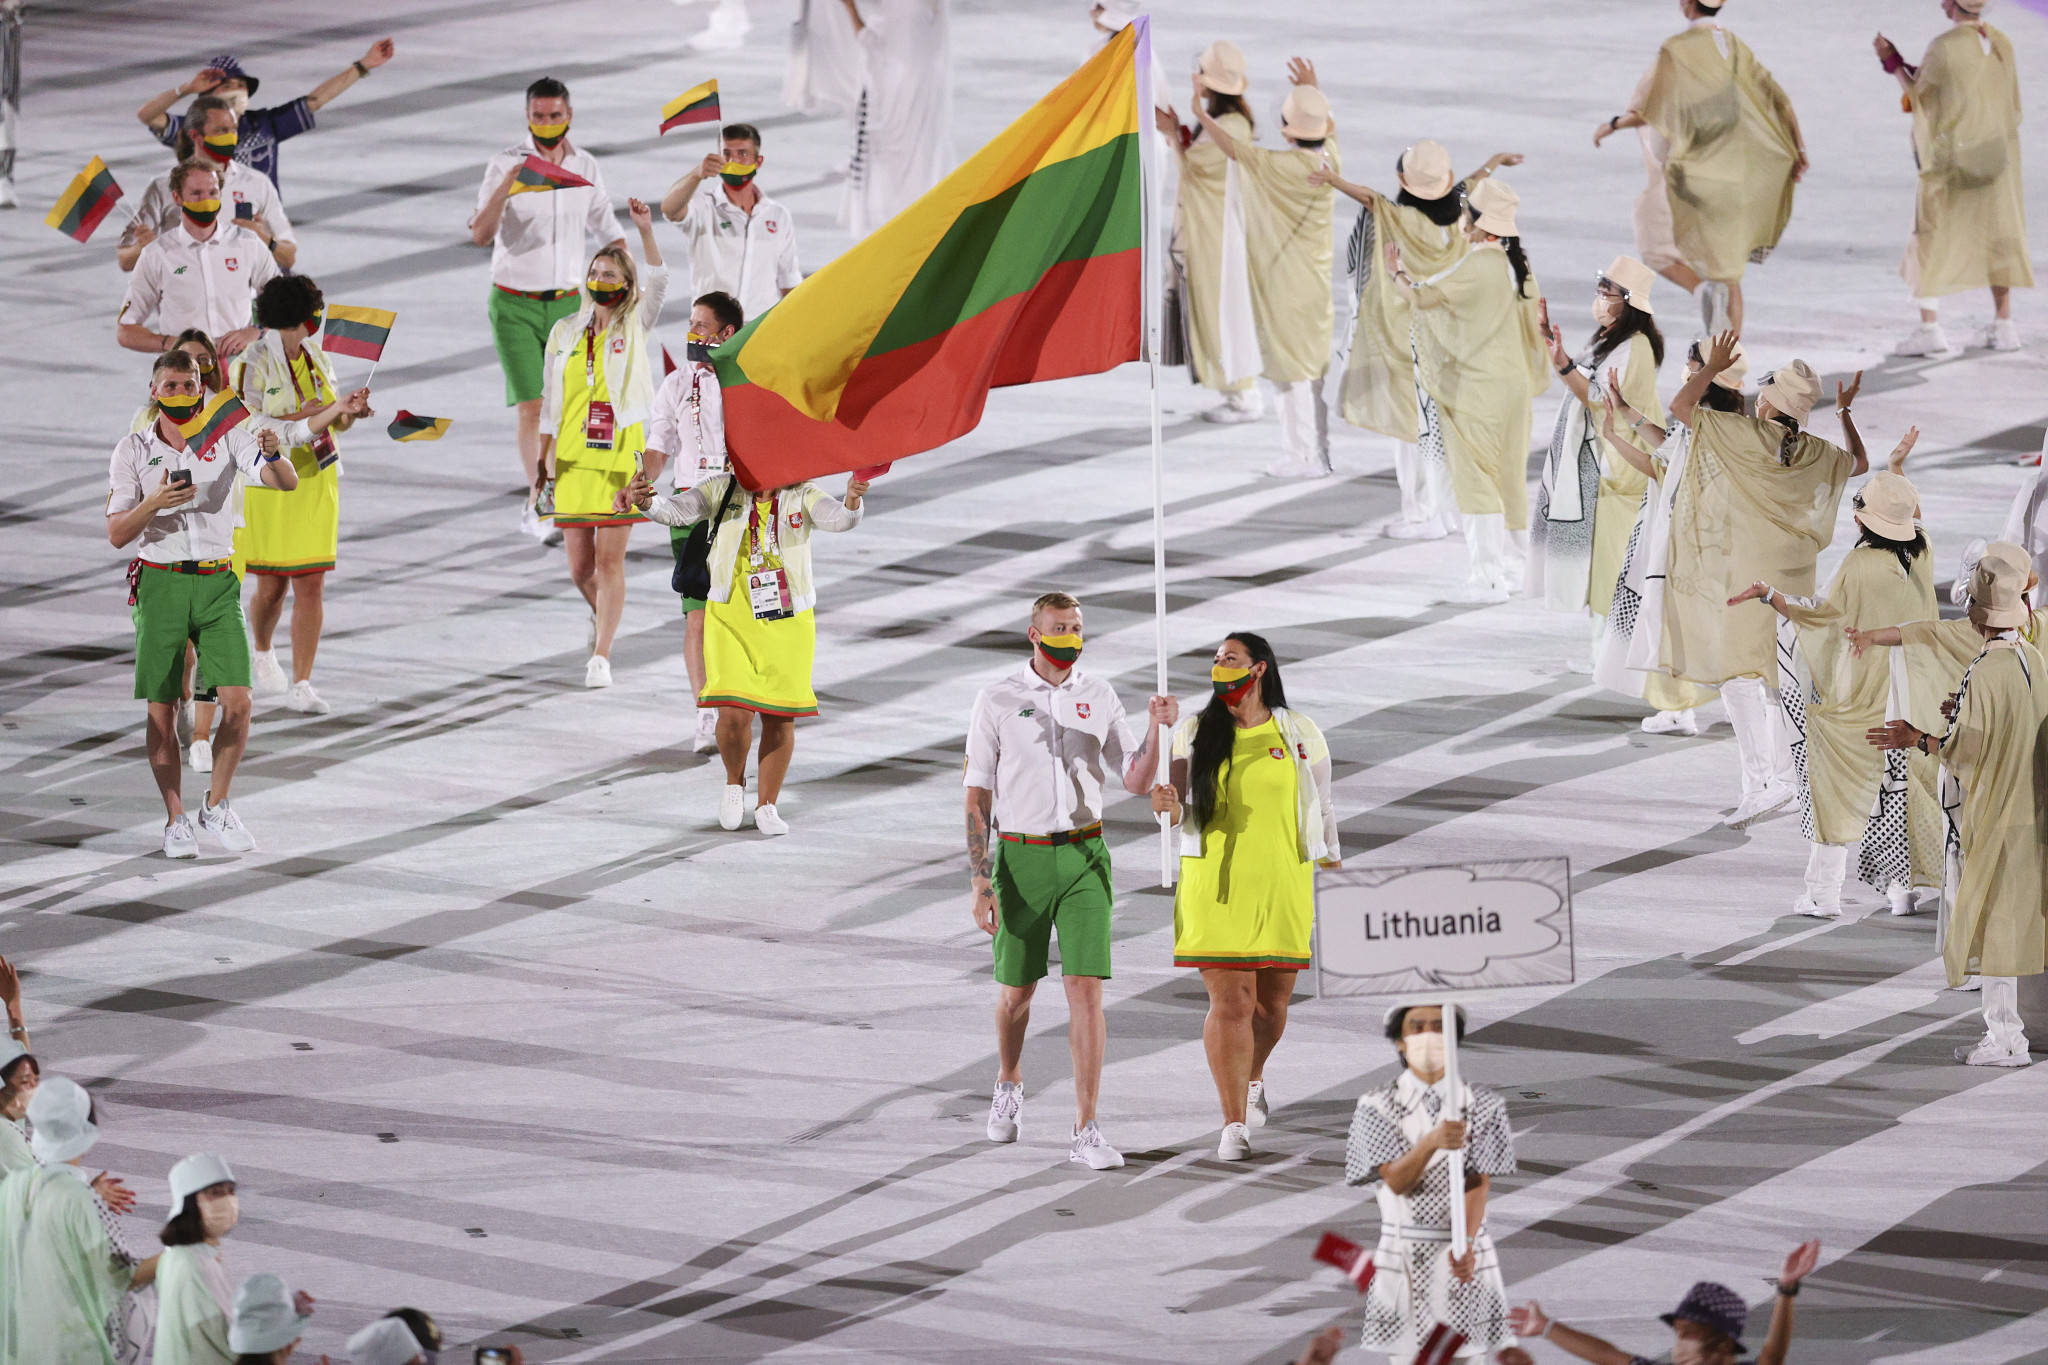 Lithuania released a strongly-worded statement calling for a ban on Russian and Belarusian athletes ©Getty Images